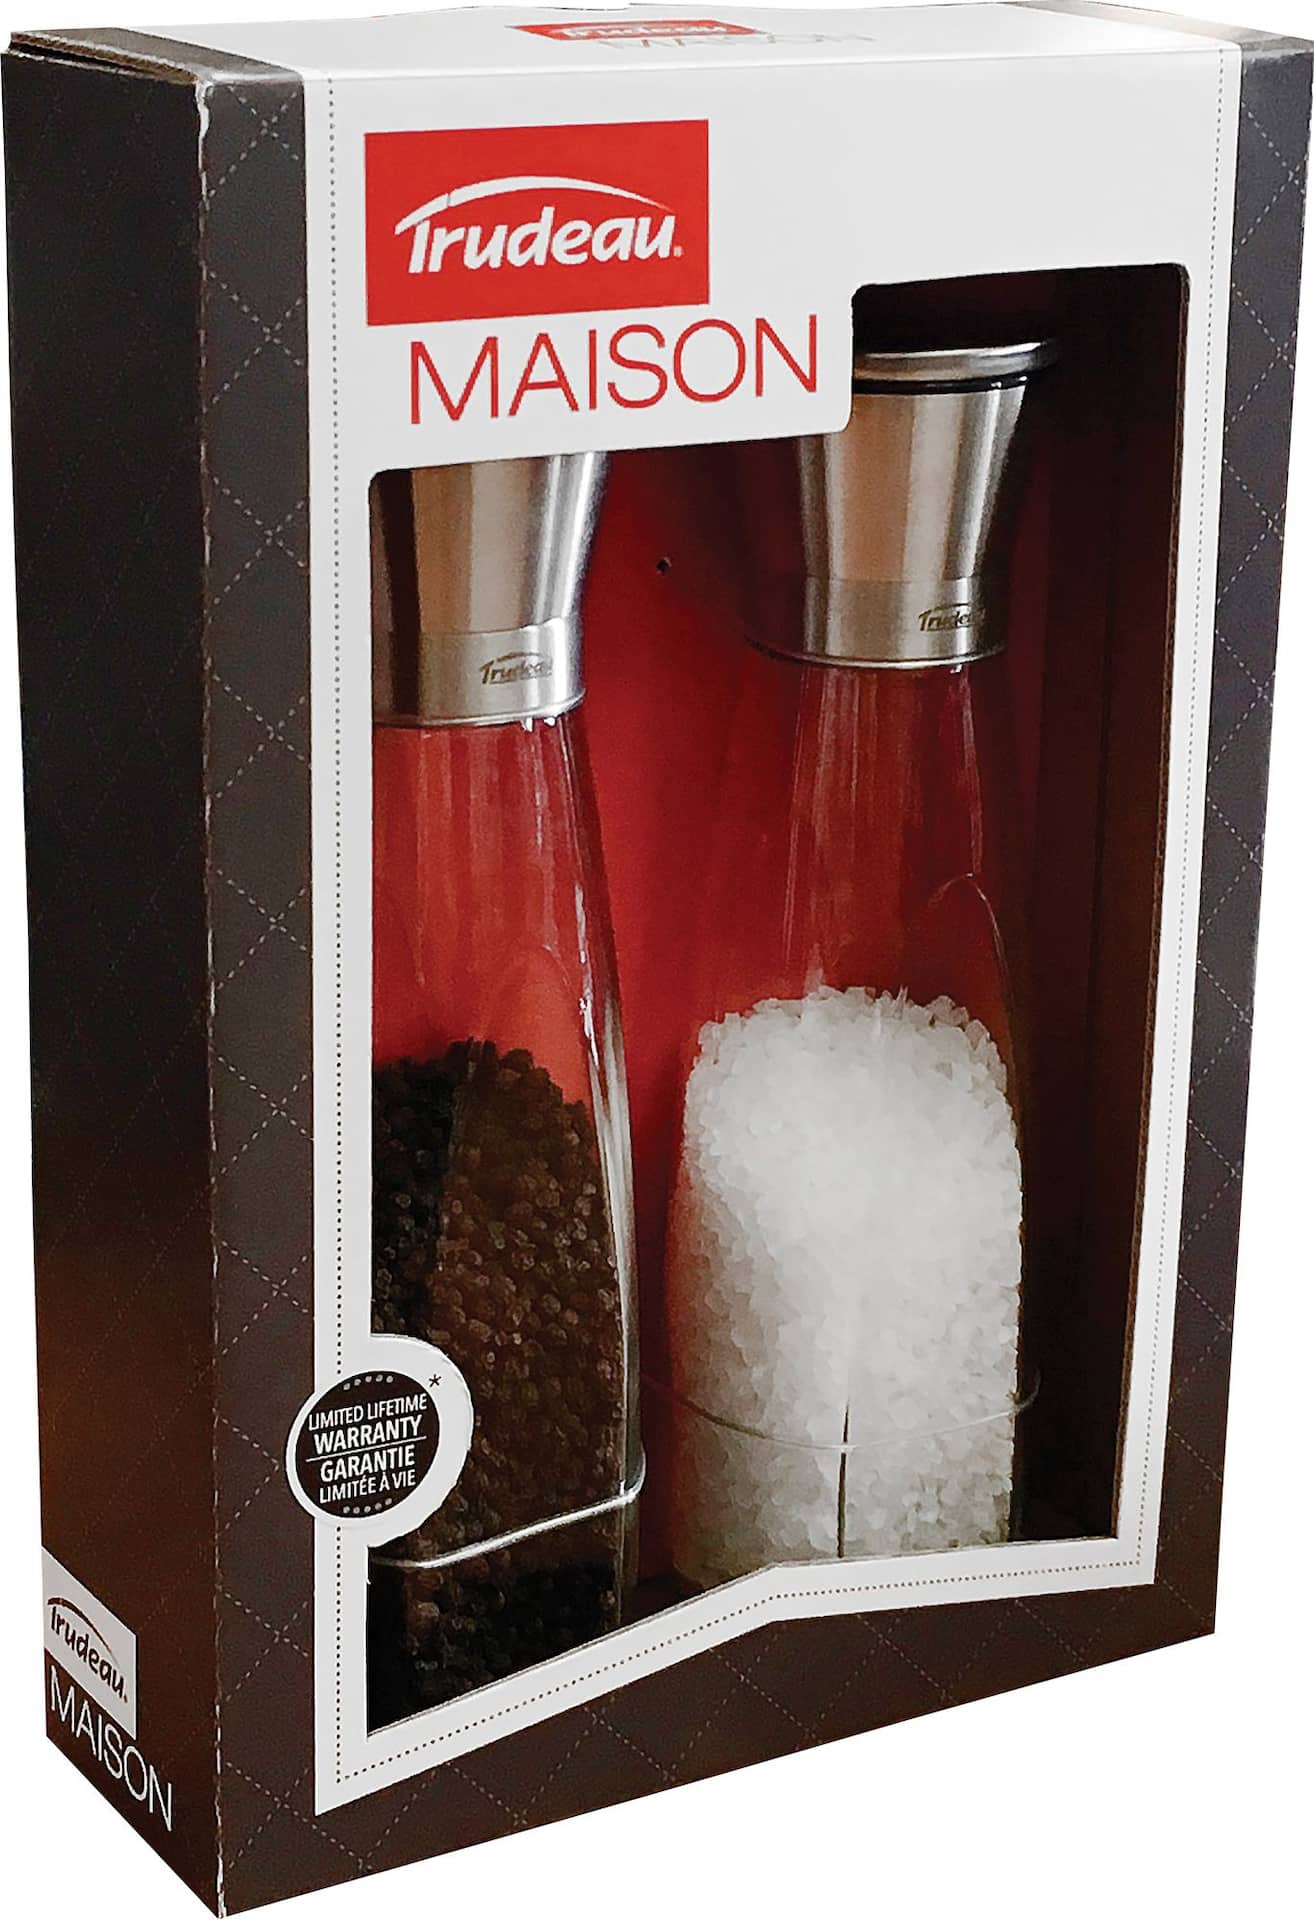 https://media-www.canadiantire.ca/product/living/kitchen/dining-and-entertaining/1422771/trueau-maison-edge-salt-and-pepper-set-1ed32bbe-e9d3-4965-8488-f0d287d8a48d-jpgrendition.jpg